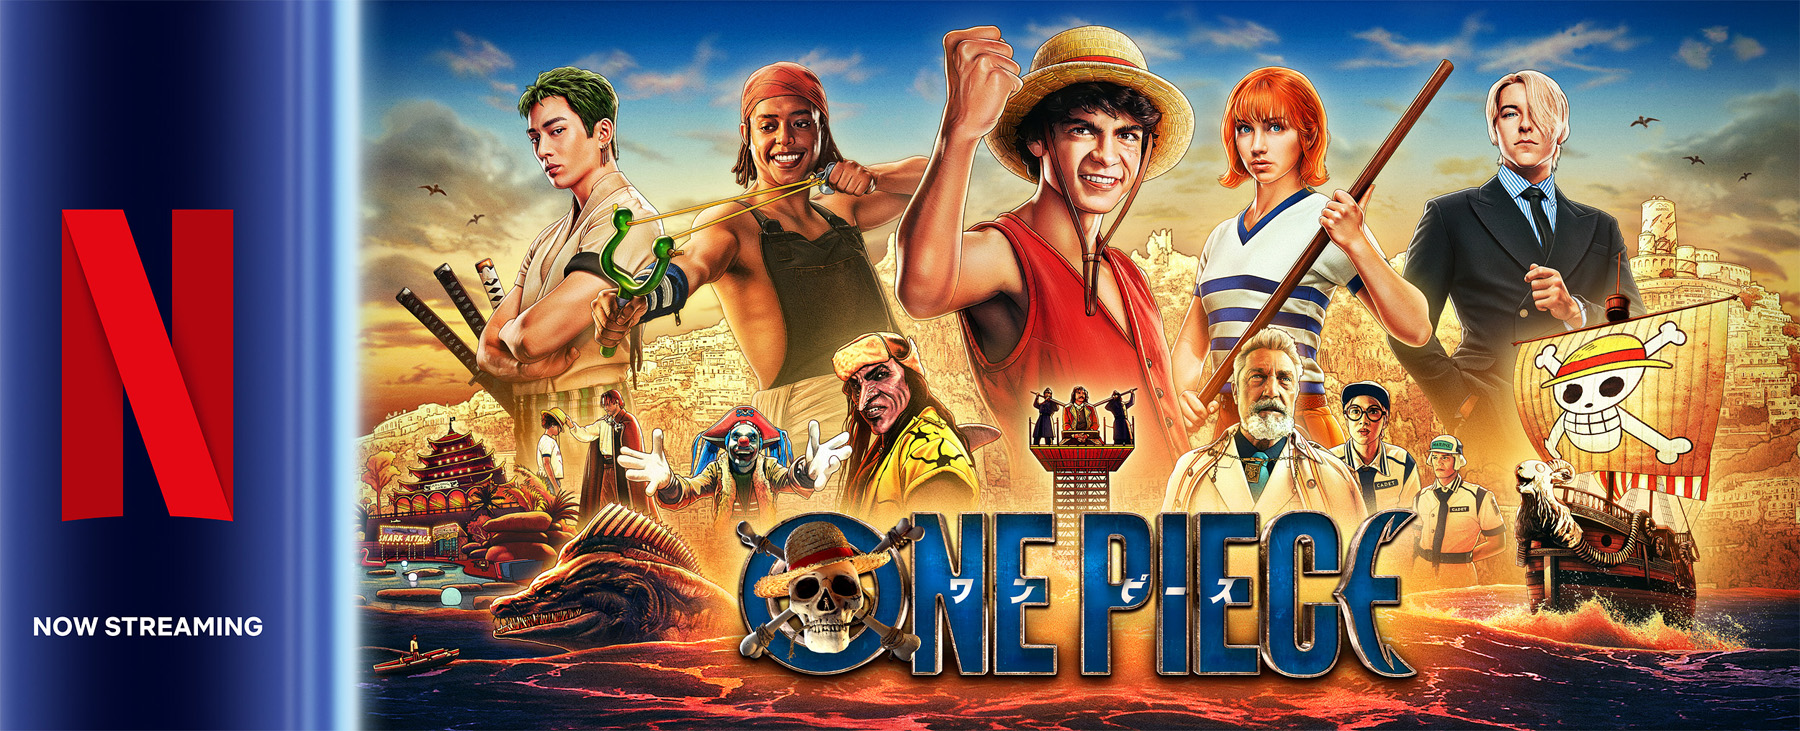 one piece live action poster - Anime Trending